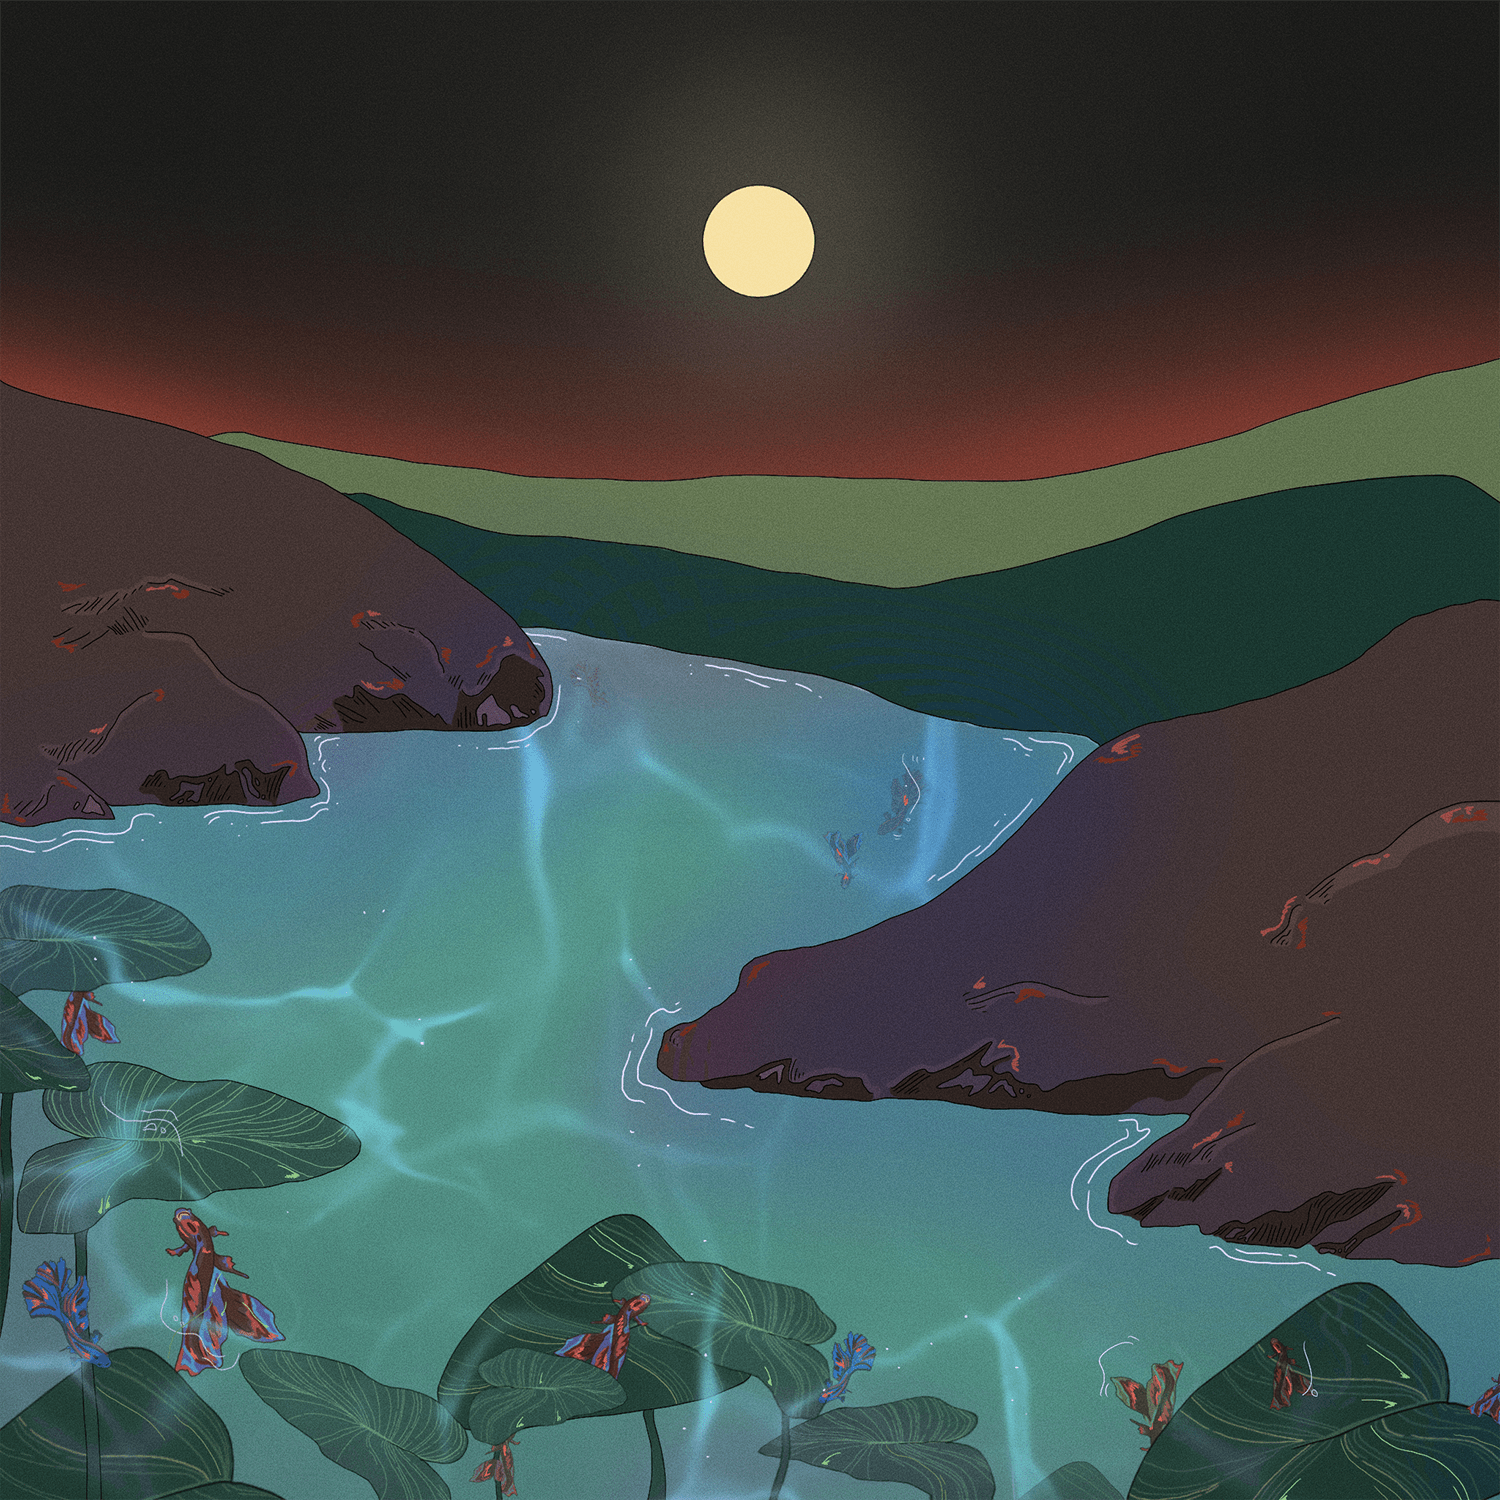 BA illustration work by Poppy Lam showing a mystical lake under moonlight with vibrant colours.